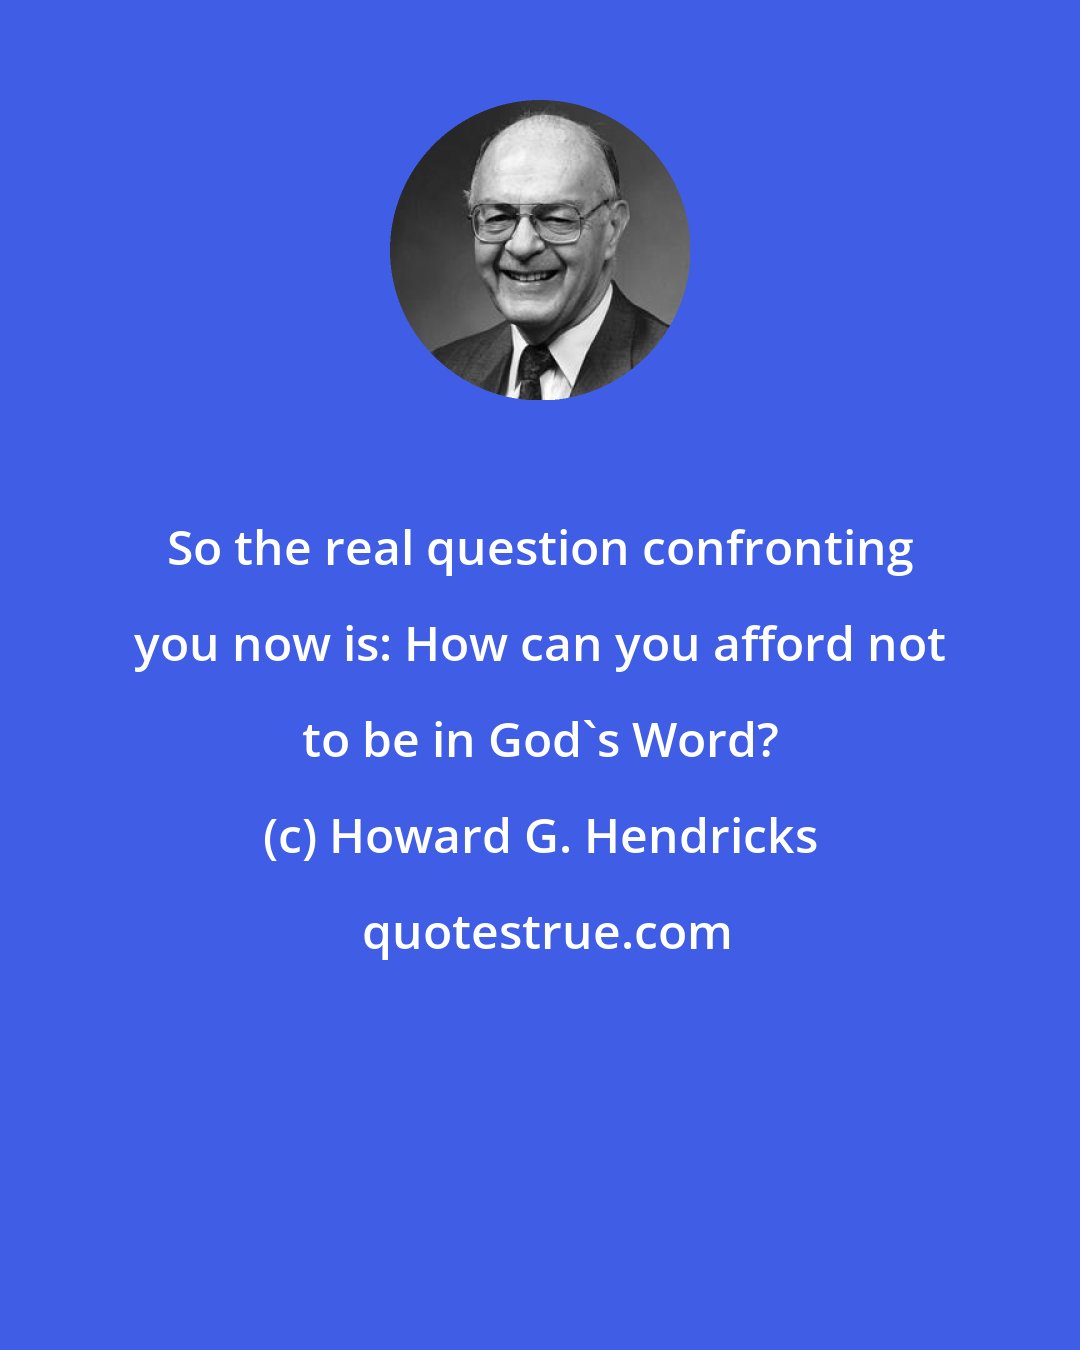 Howard G. Hendricks: So the real question confronting you now is: How can you afford not to be in God's Word?